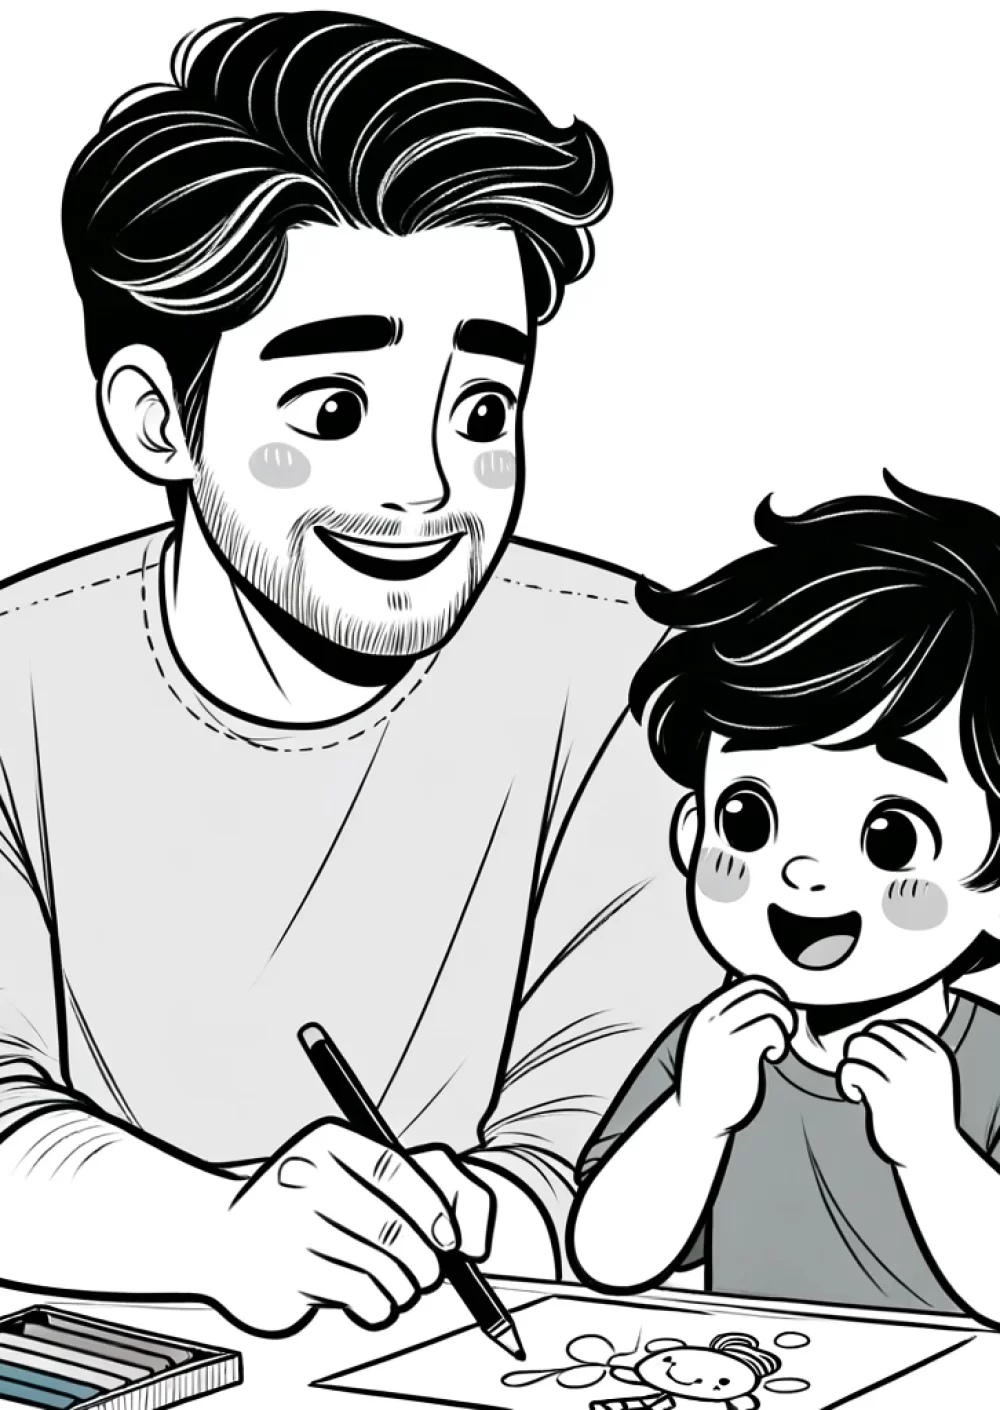 Coloring page style picture of the website creator and his preschool age son coloring